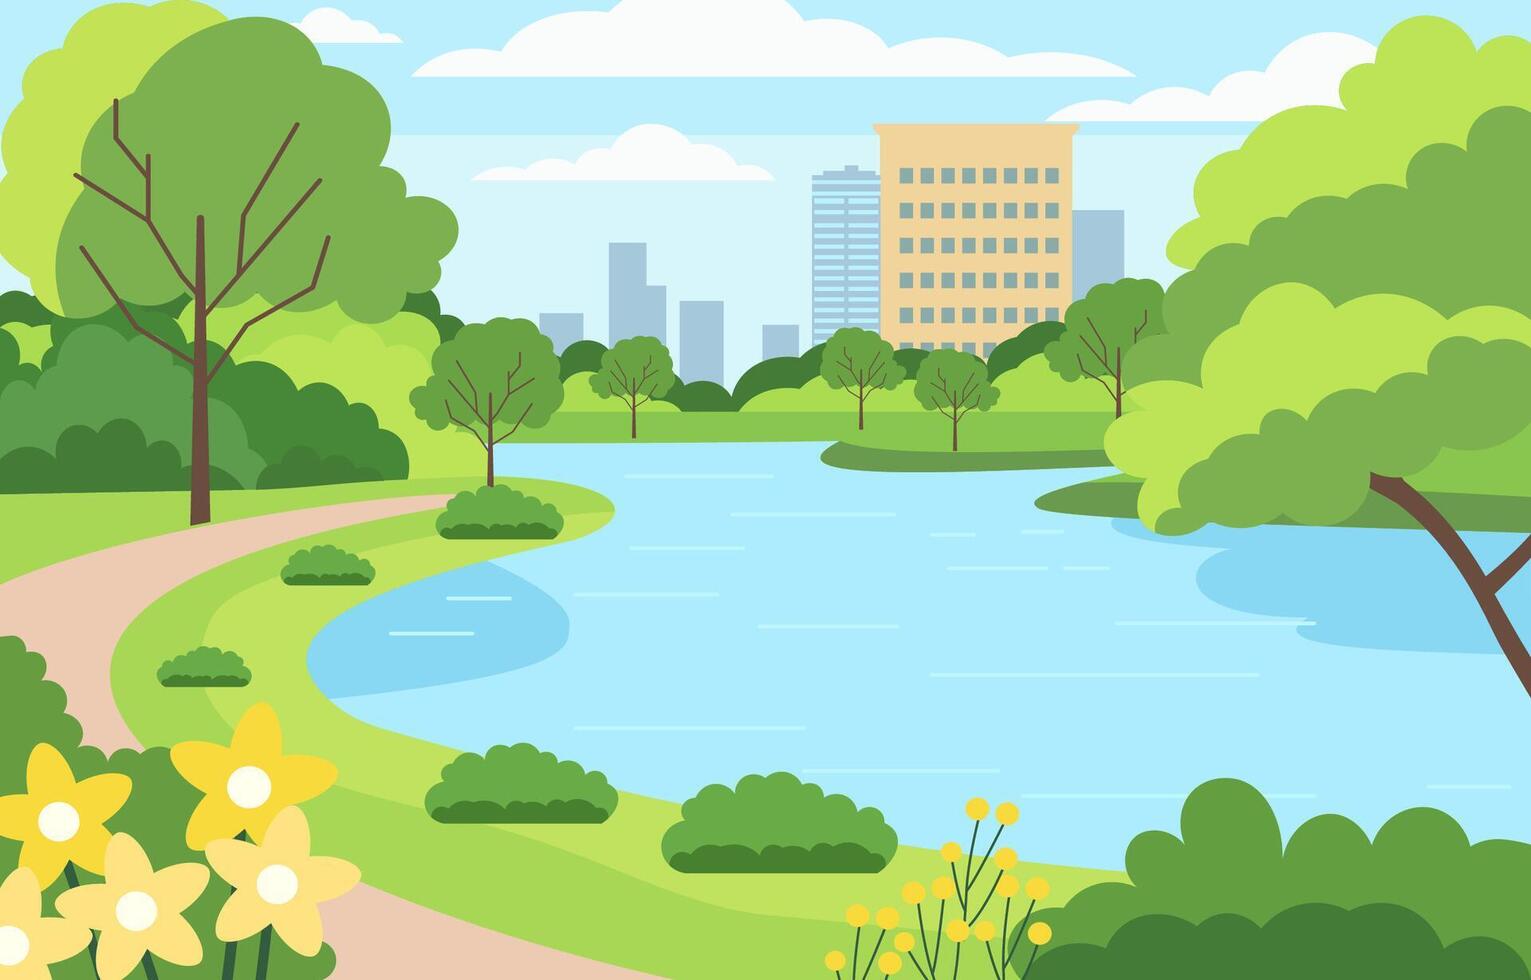 Flat Design Illustration of Lake River in City Park with Green Trees in Bright Day vector